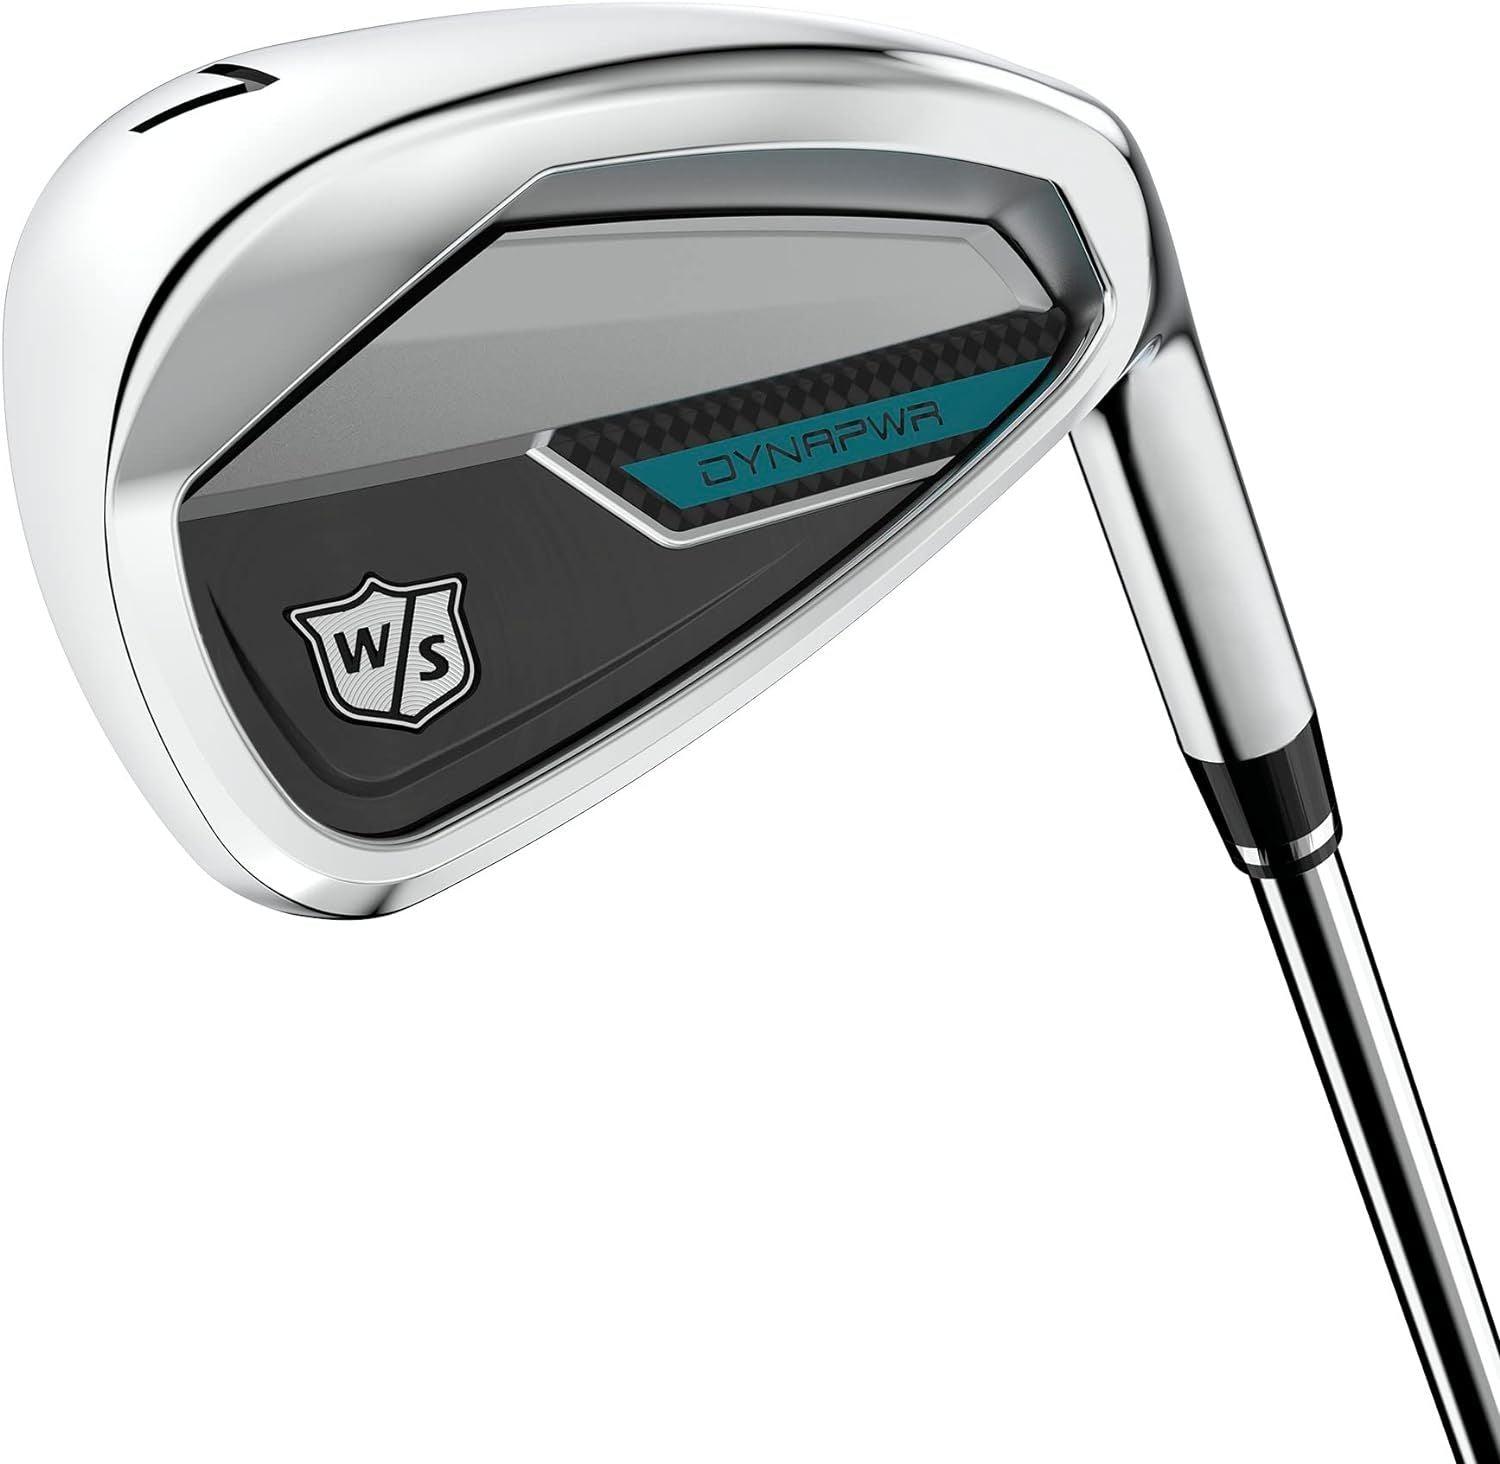 Wilson  Women's DynaPower Irons Set 6-PW + GW + SW Ladies Flex Right Handed with Evenflow Graphite - Silver - Excellent